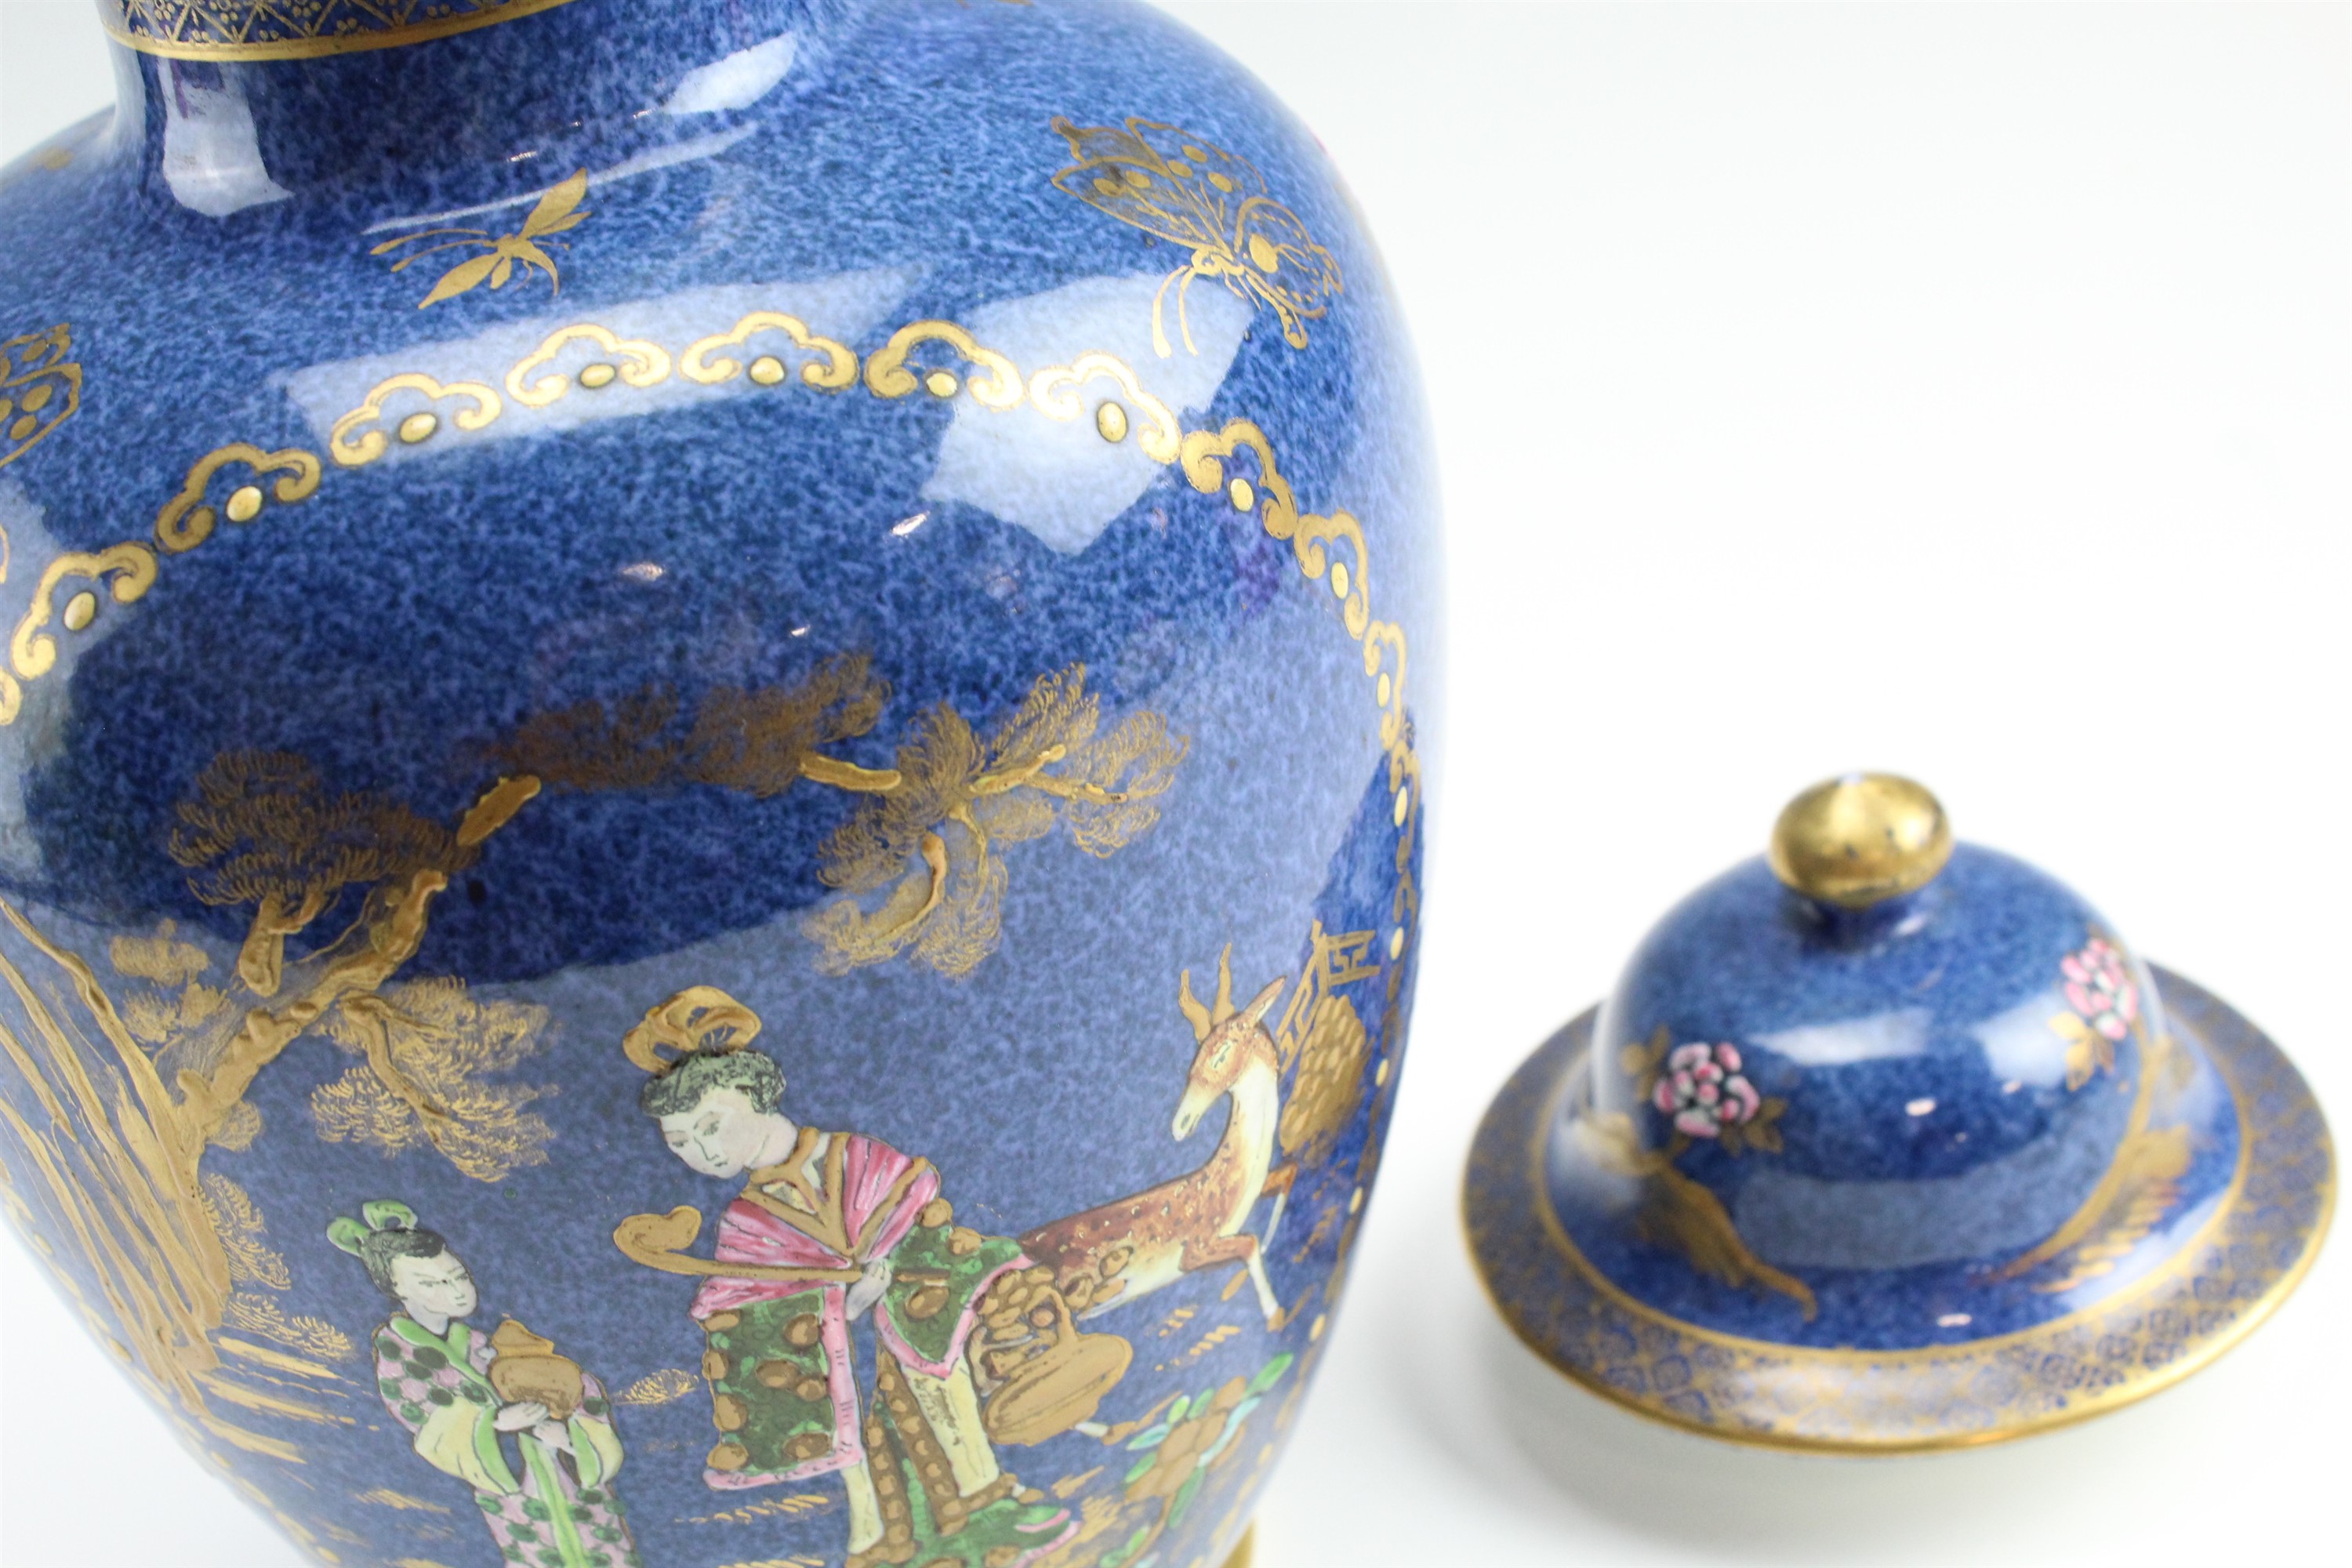 A 1920s New Chelsea Porcelain chinoiserie covered vase, 26 cm - Image 2 of 2